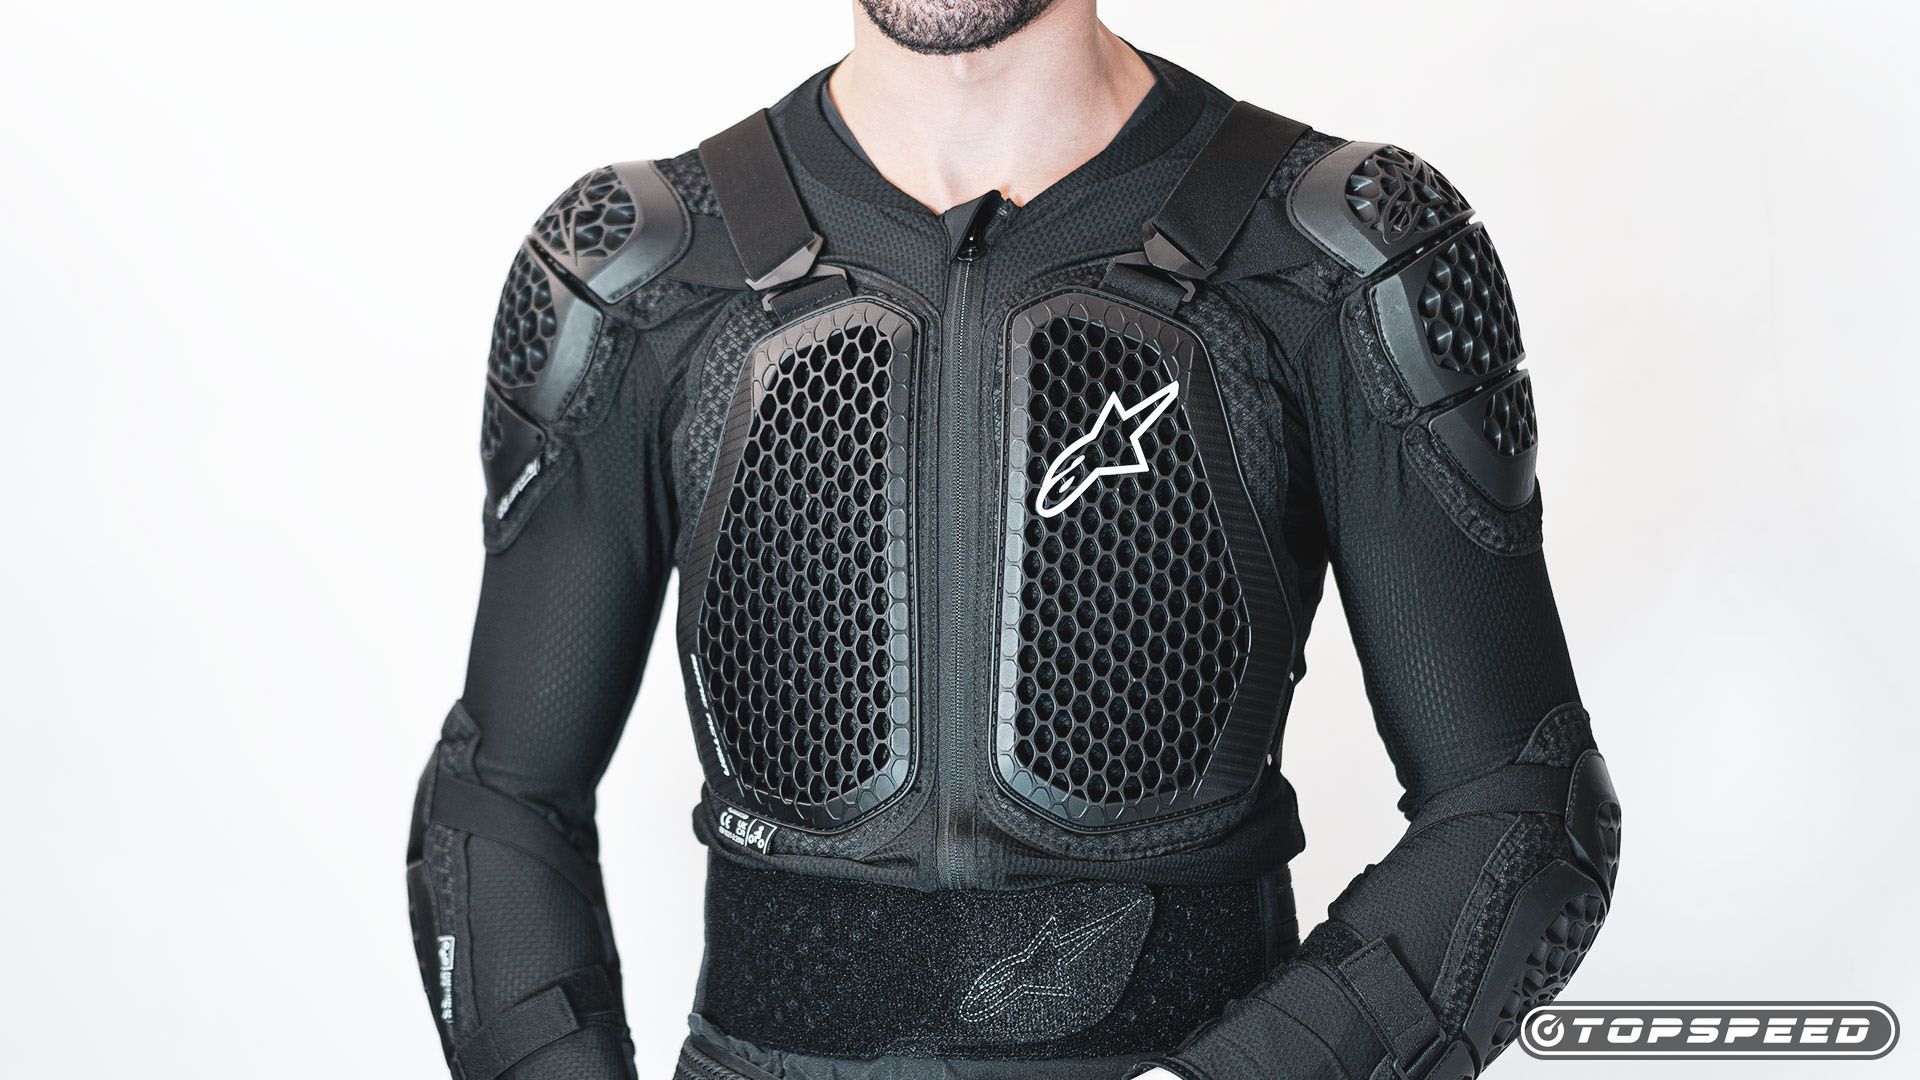 Front view of the Alpinestars Bionic Action V2 Protection Jacket.